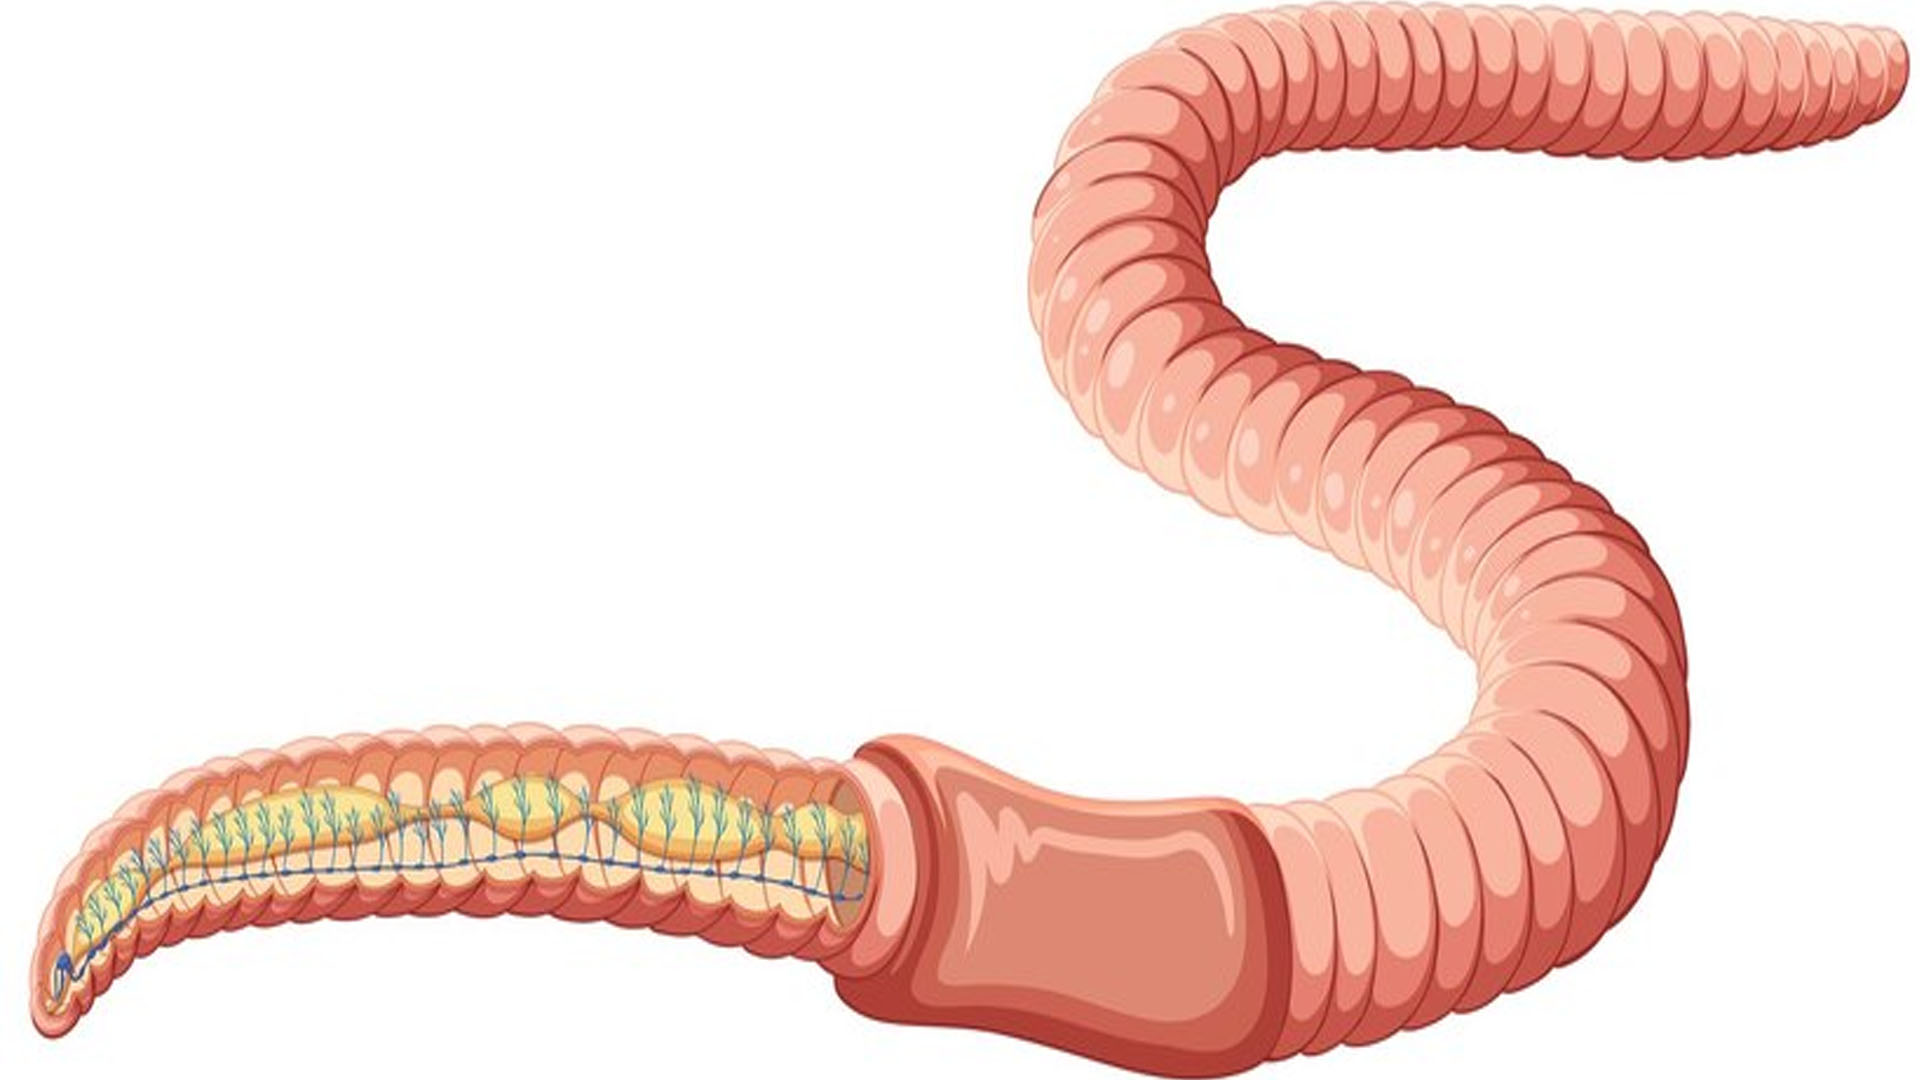 What are the Symptoms of a Tapeworm Infection?